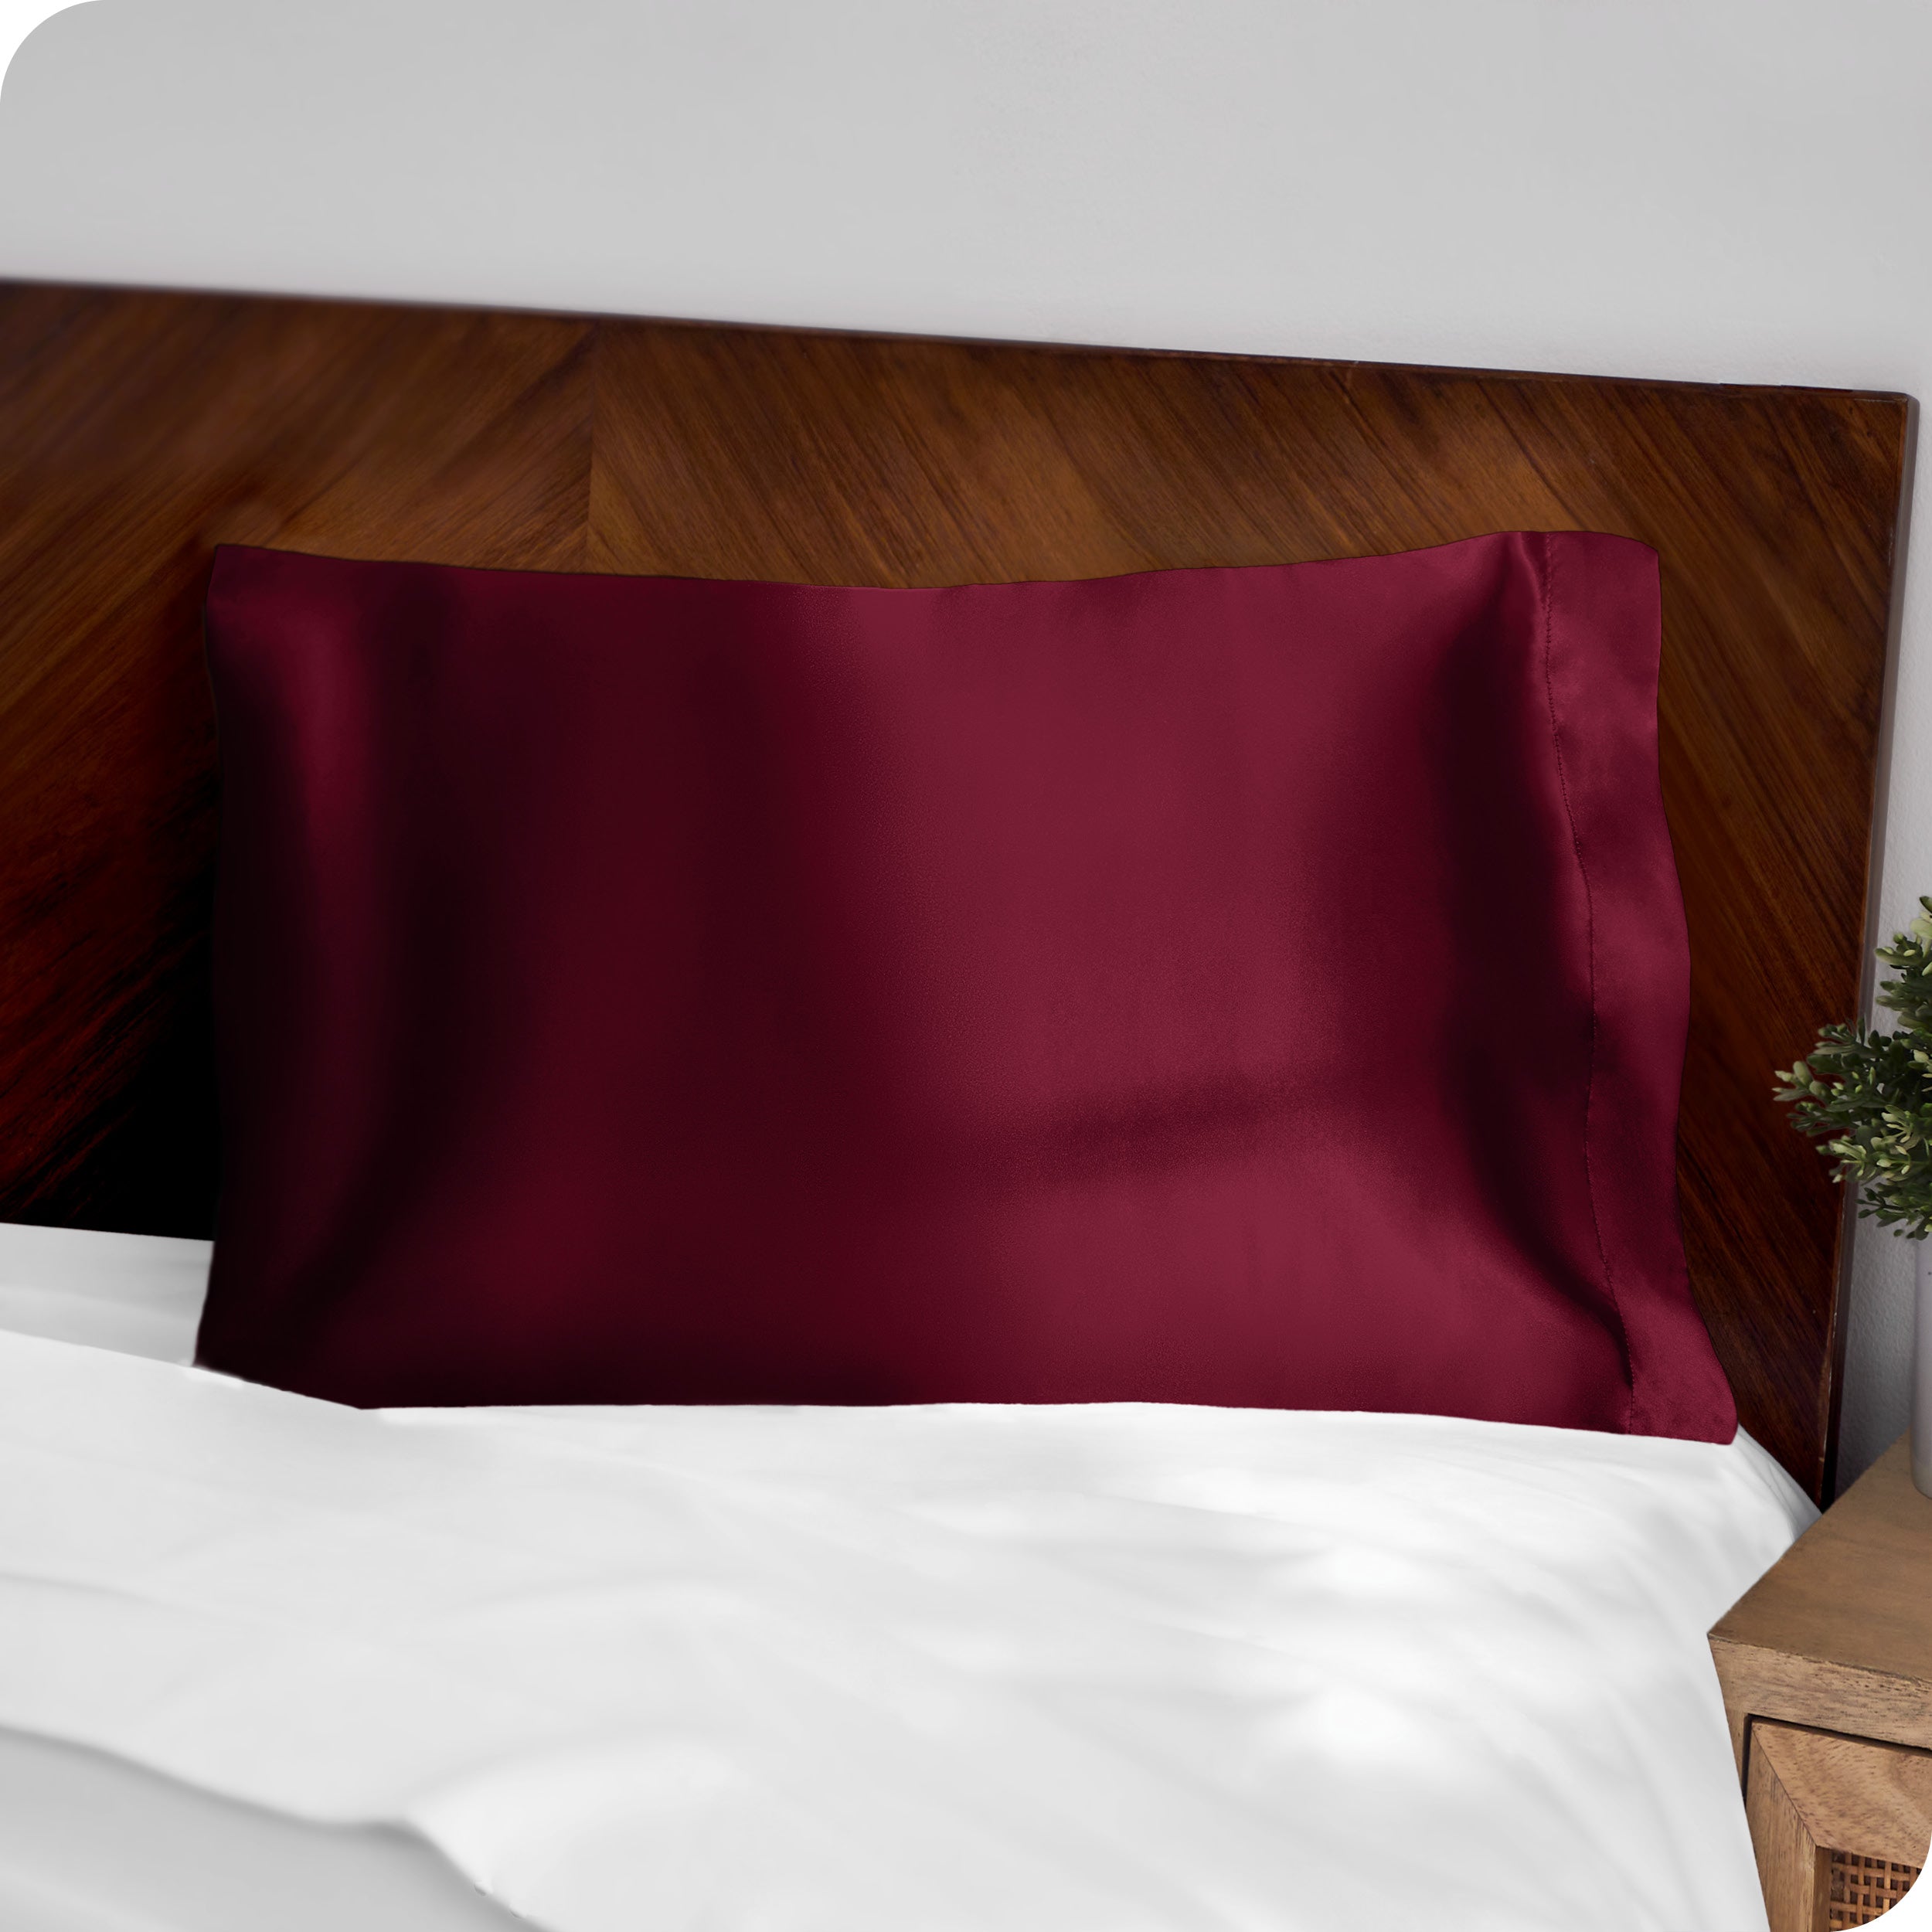 A red silk pillowcase on a pillow resting on a headboard